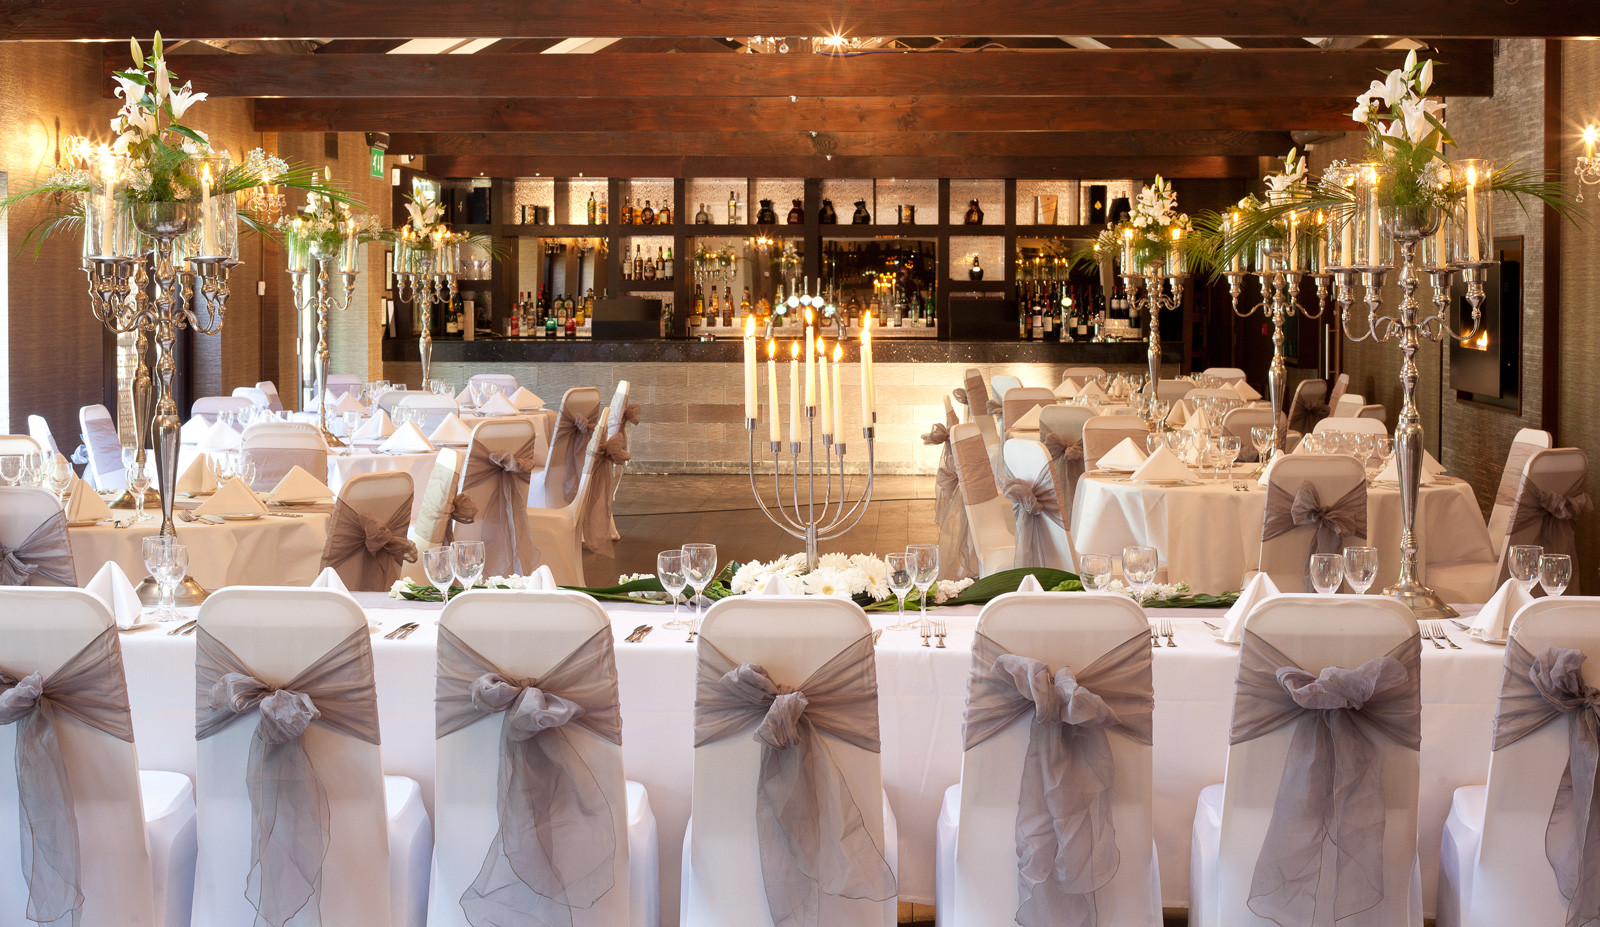 Inexpensive Wedding Venues
 Tips to arrange a Wedding in an Inexpensive Venue in